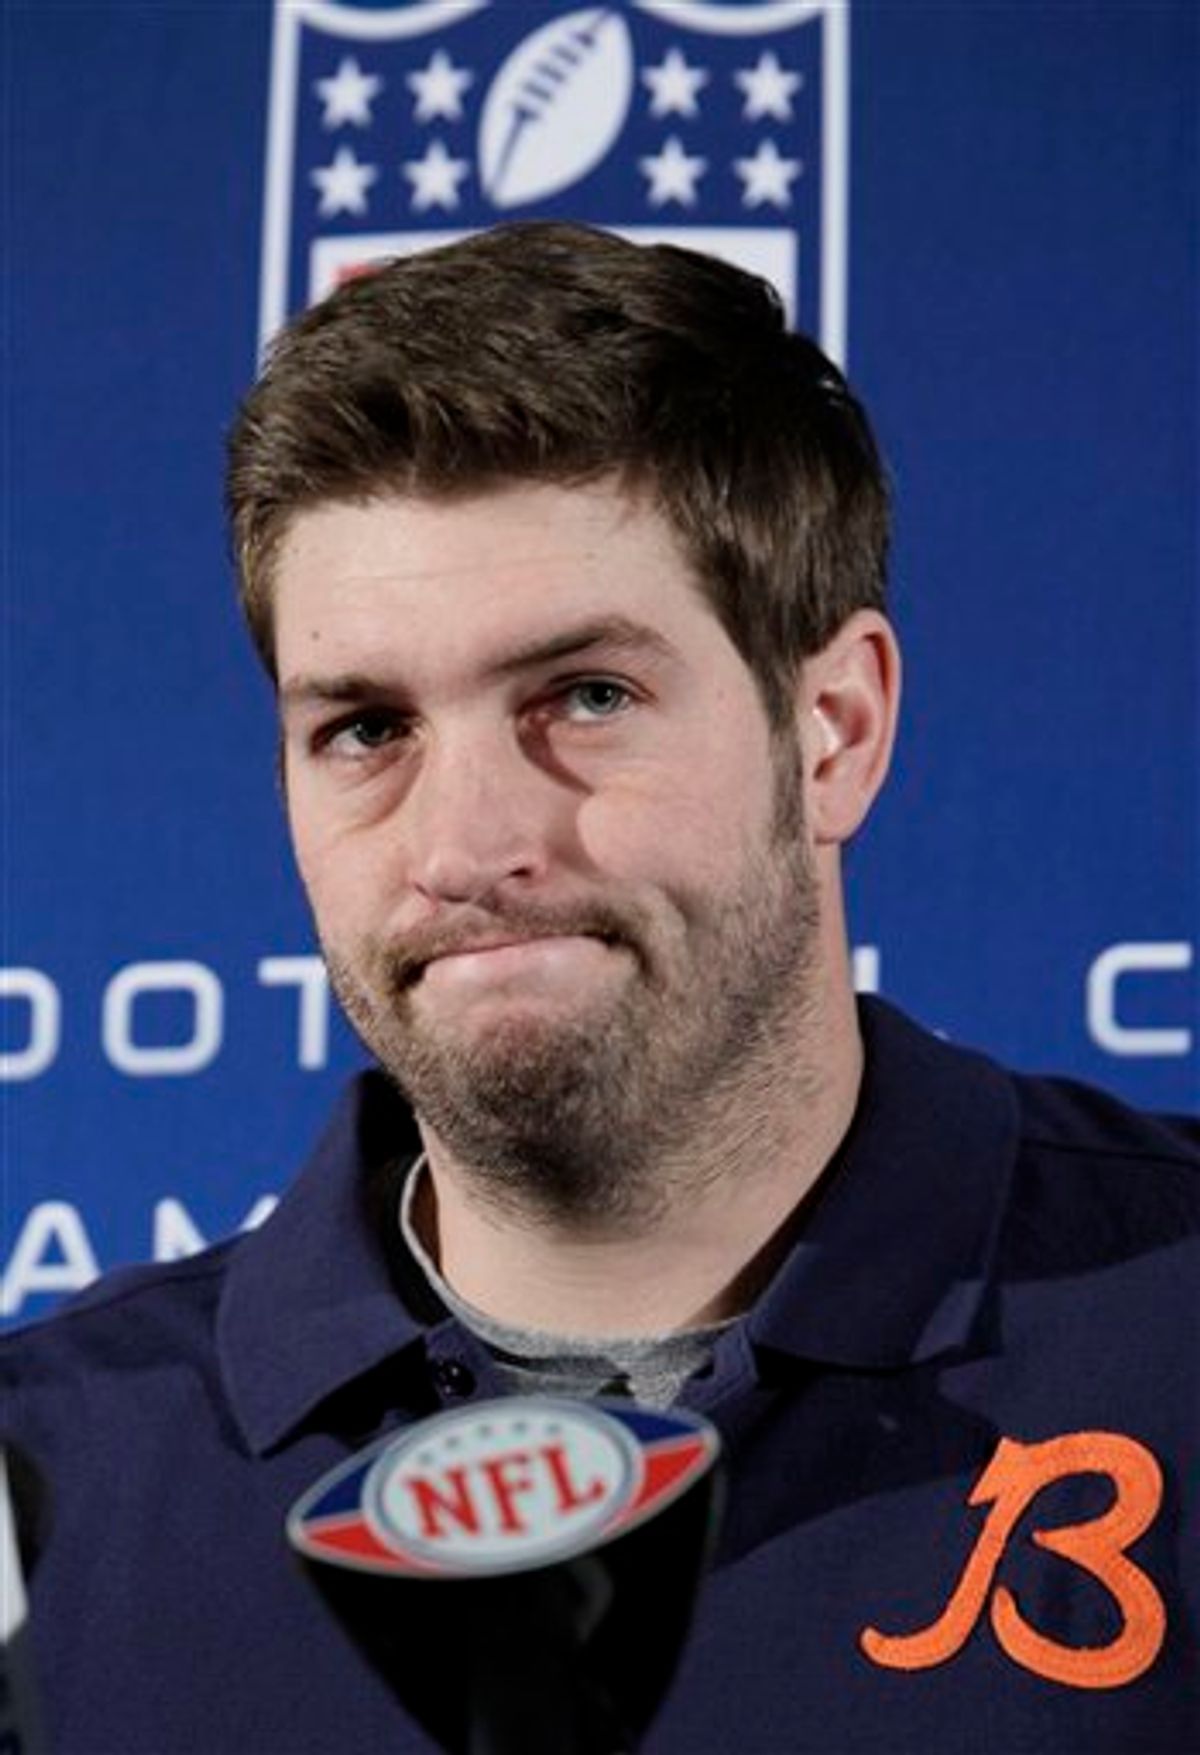 Chicago Bears quarterback Jay Cutler listens to question during an NFL football news conference at Halas Hall, Wednesday, Jan. 19, 2011, in Lake Forest, Ill. The Bears are scheduled to host the Green Bay Packers in the NFC Championship game on Sunday, Jan. 23. (AP Photo/Nam Y. Huh) (AP)